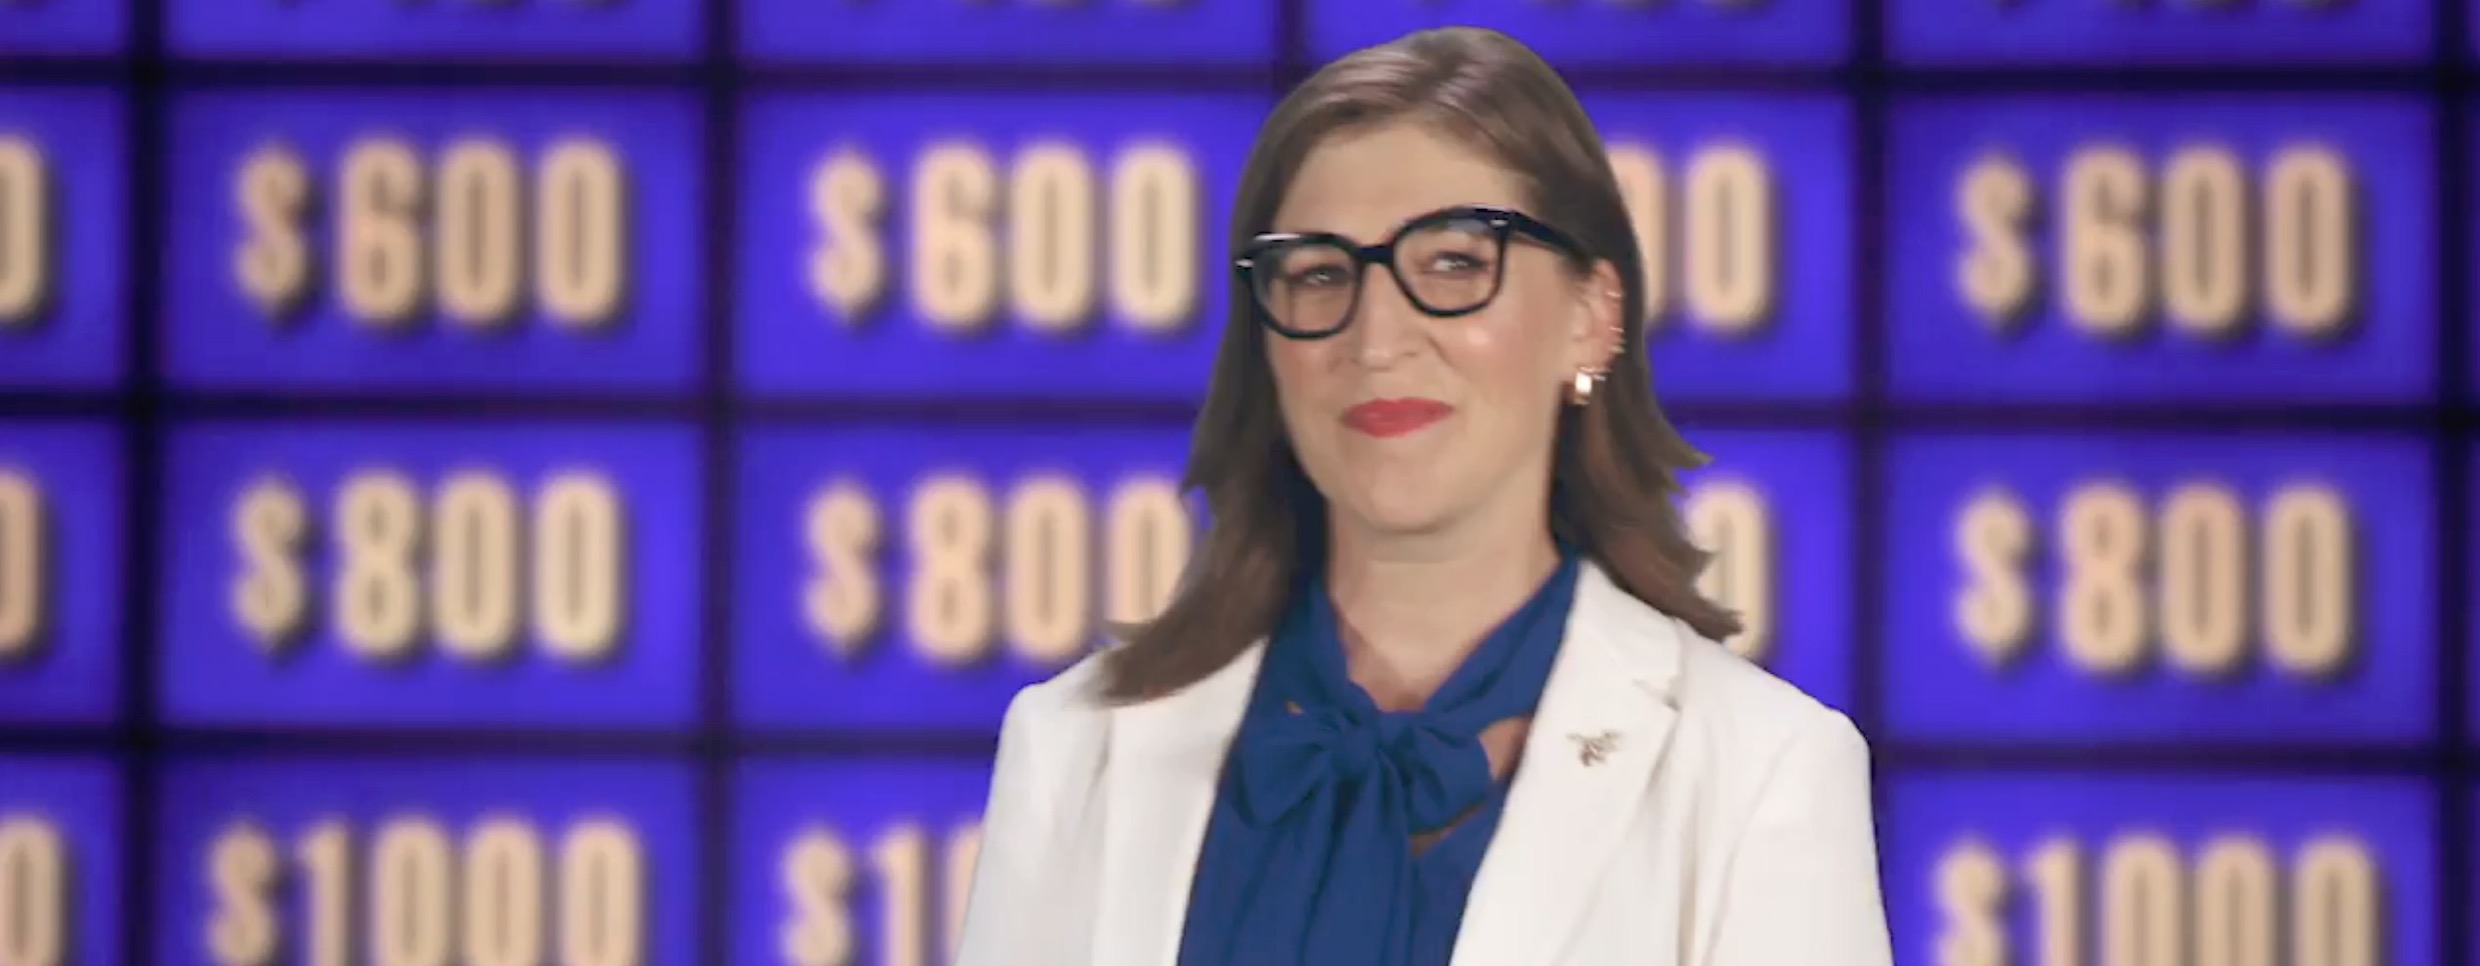 See The Complete List Of 'Celebrity Jeopardy!' Contestants